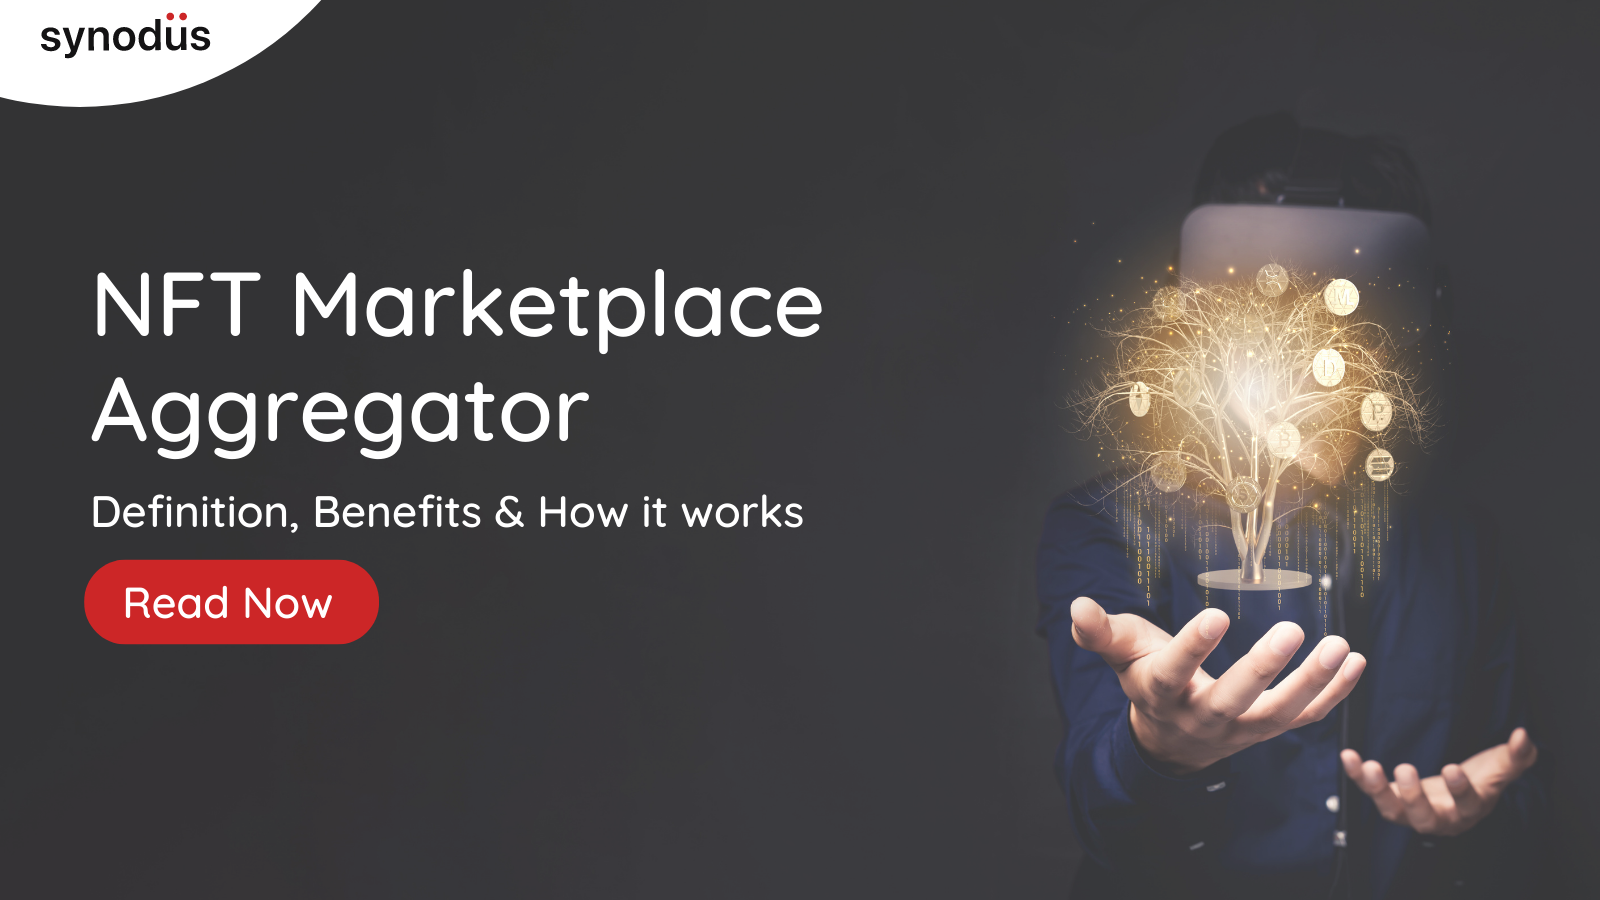 NFT Marketplace Aggregator - Definition, Benefits and How It works